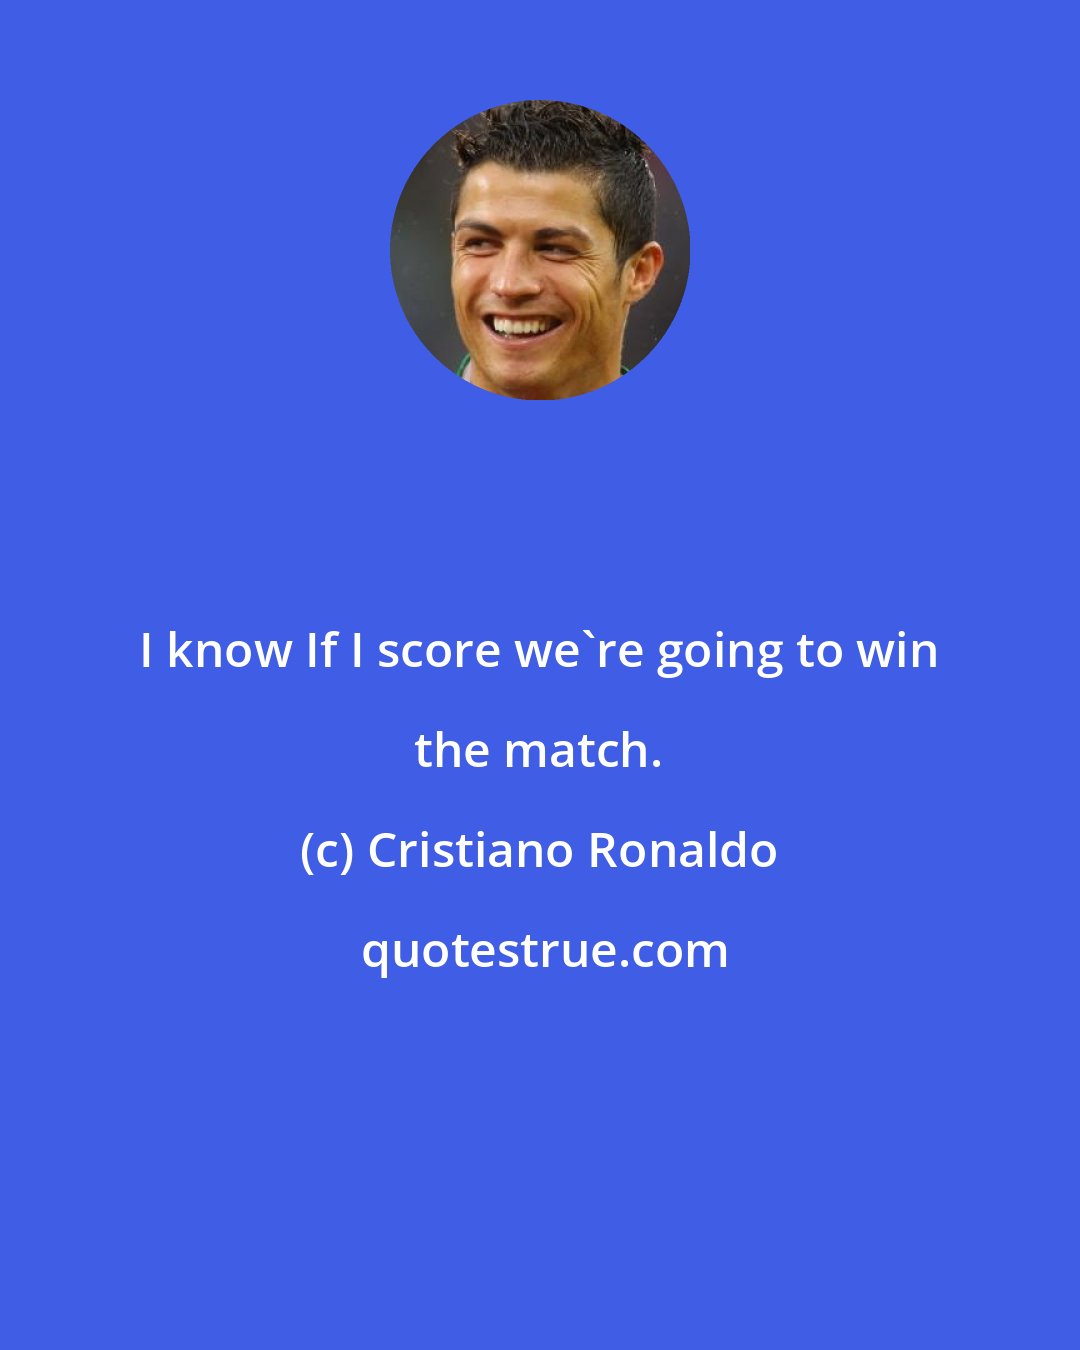 Cristiano Ronaldo: I know If I score we're going to win the match.